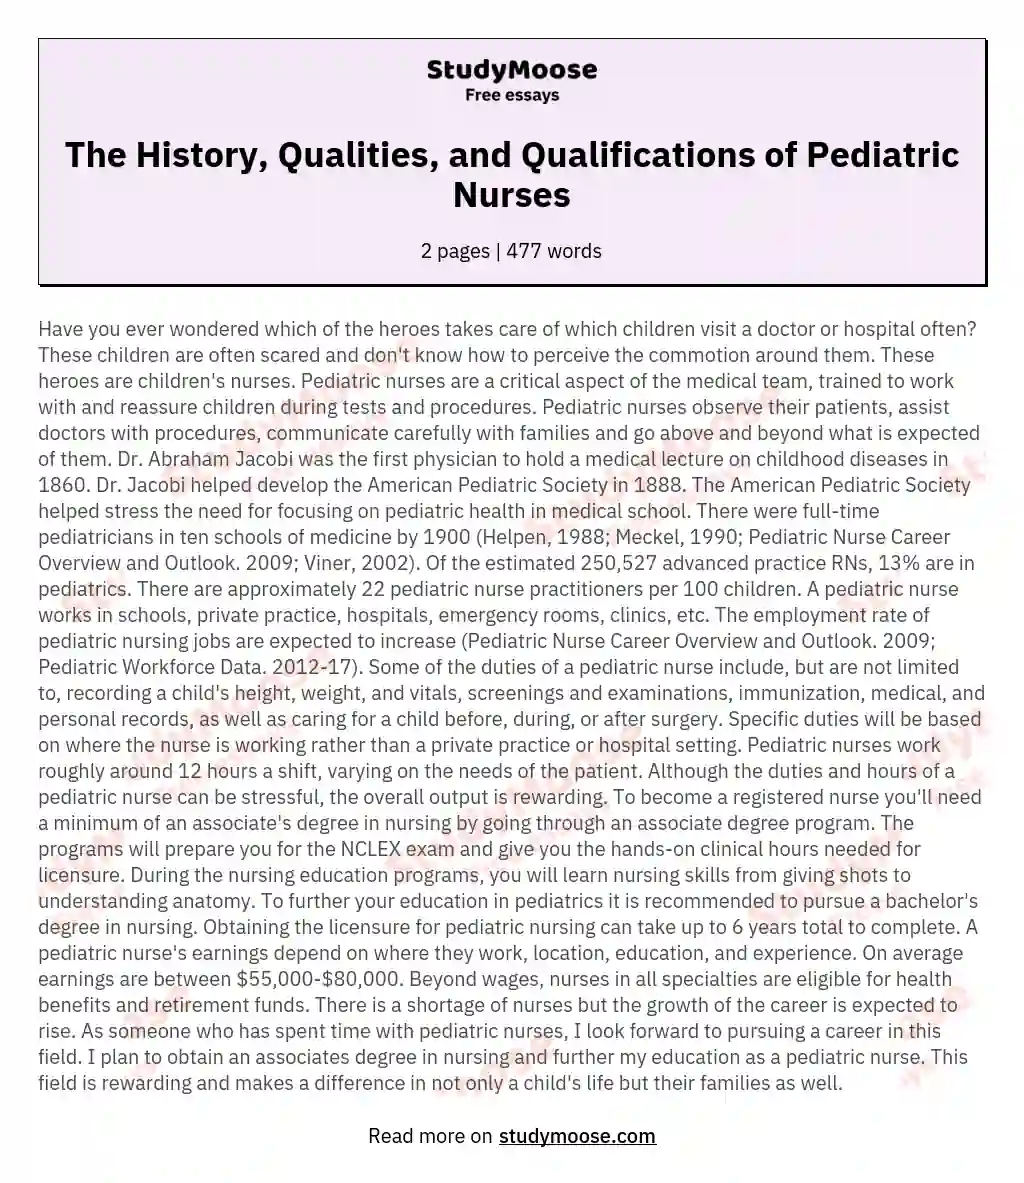 The History, Qualities, and Qualifications of Pediatric Nurses essay